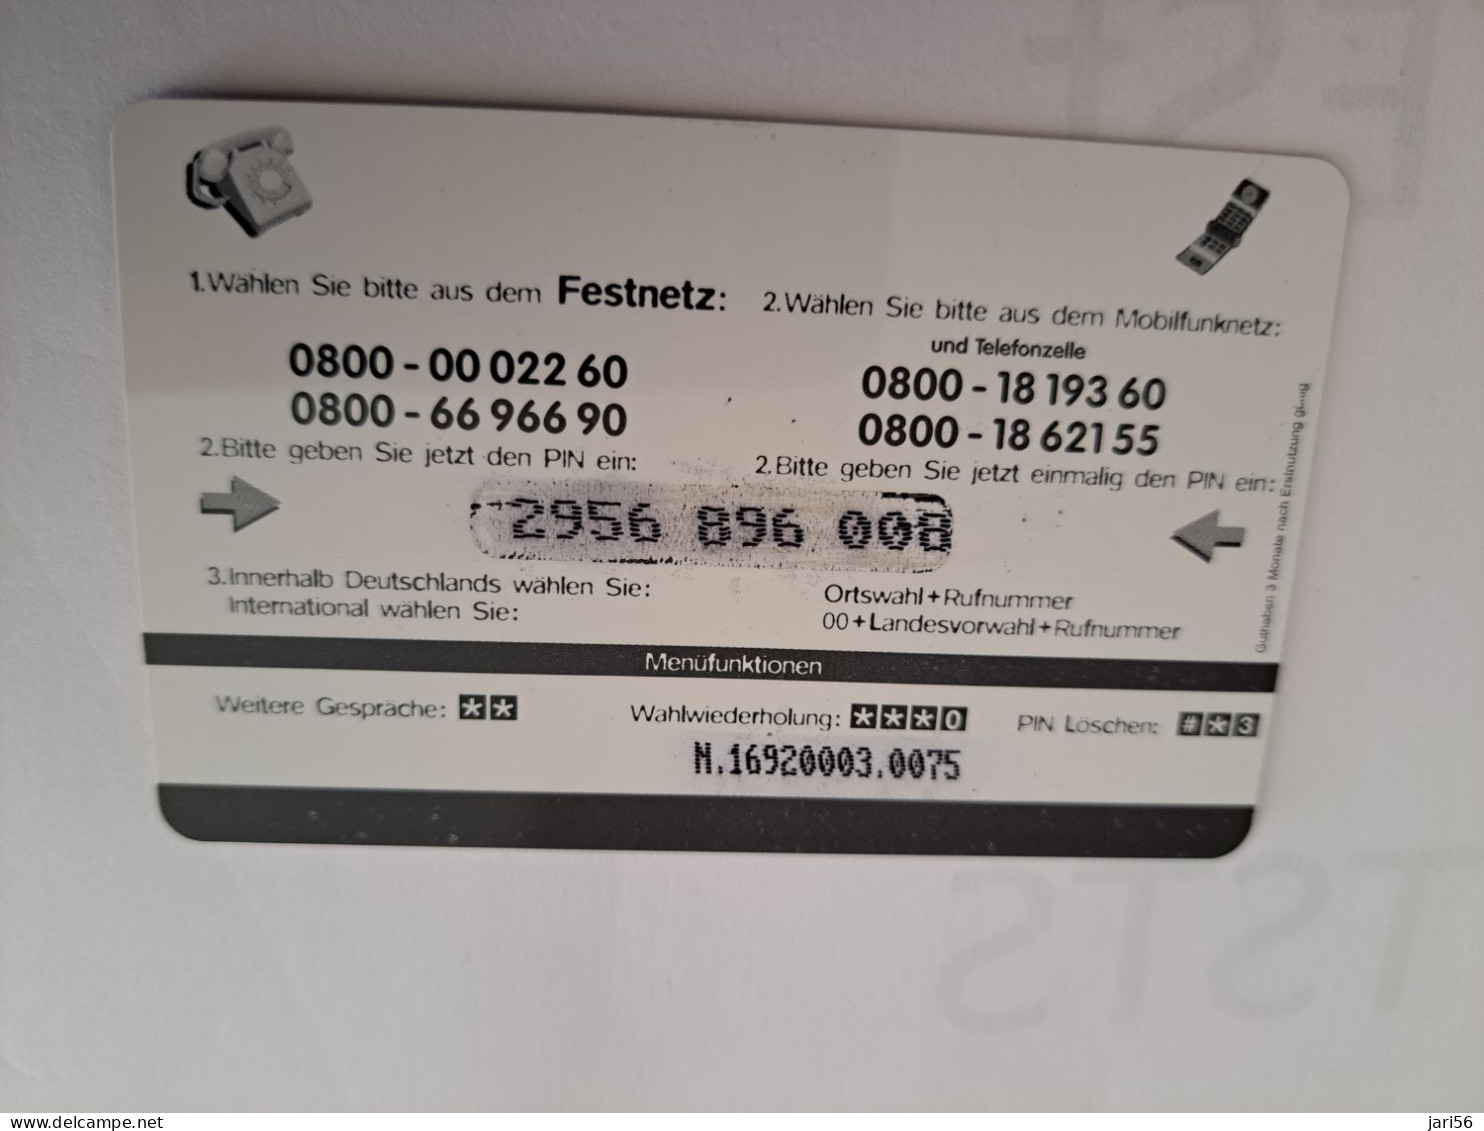 DUITSLAND/GERMANY  € 6,- / PLANET/ PIGEON BIRD   ON CARD        Fine Used  PREPAID  **16531** - [2] Mobile Phones, Refills And Prepaid Cards